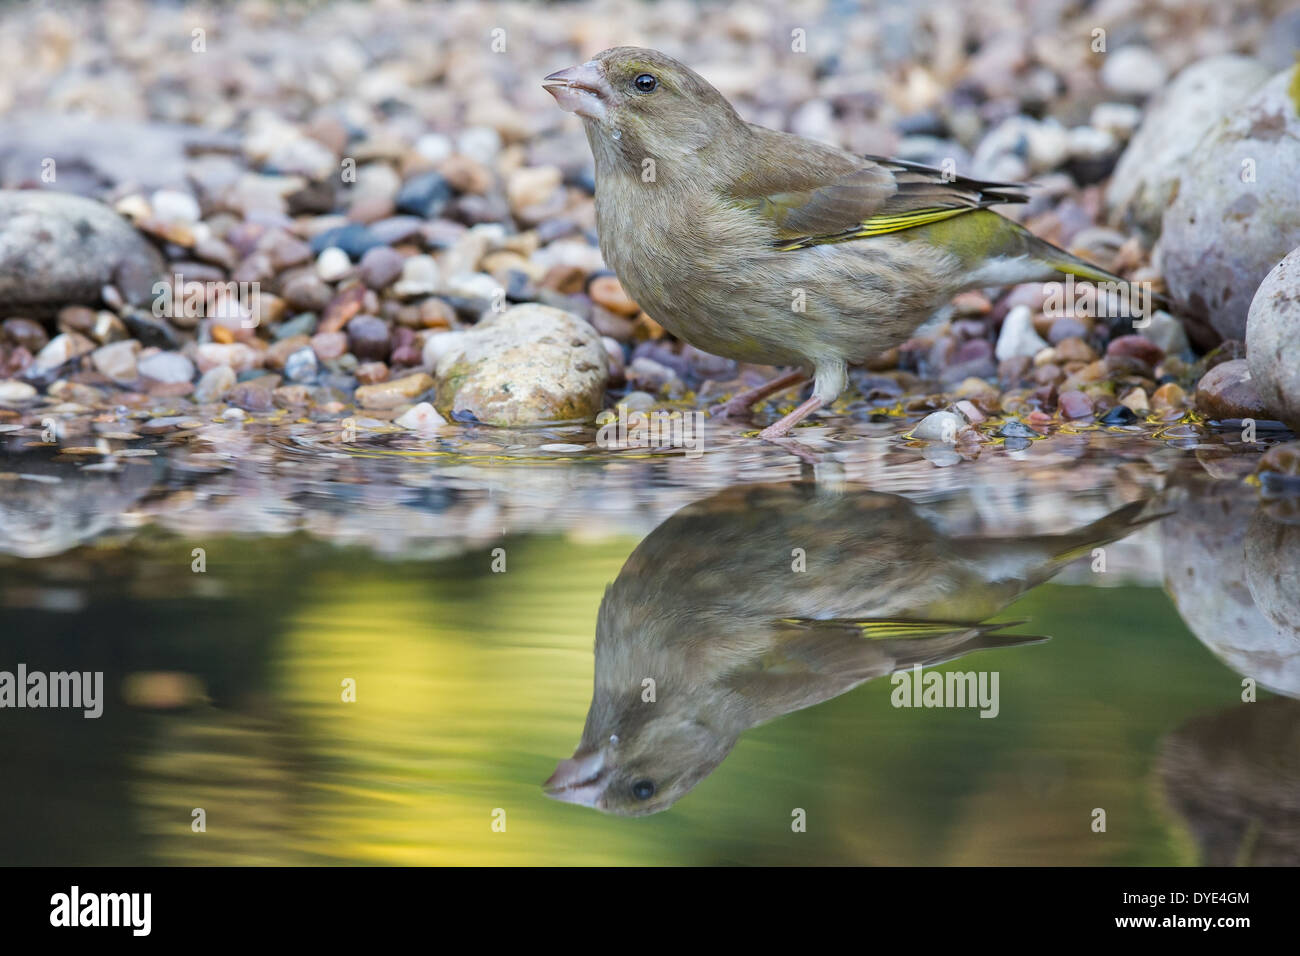 A female Greenfinch (Chloris chloris) drinking at the edge of a pool Stock Photo